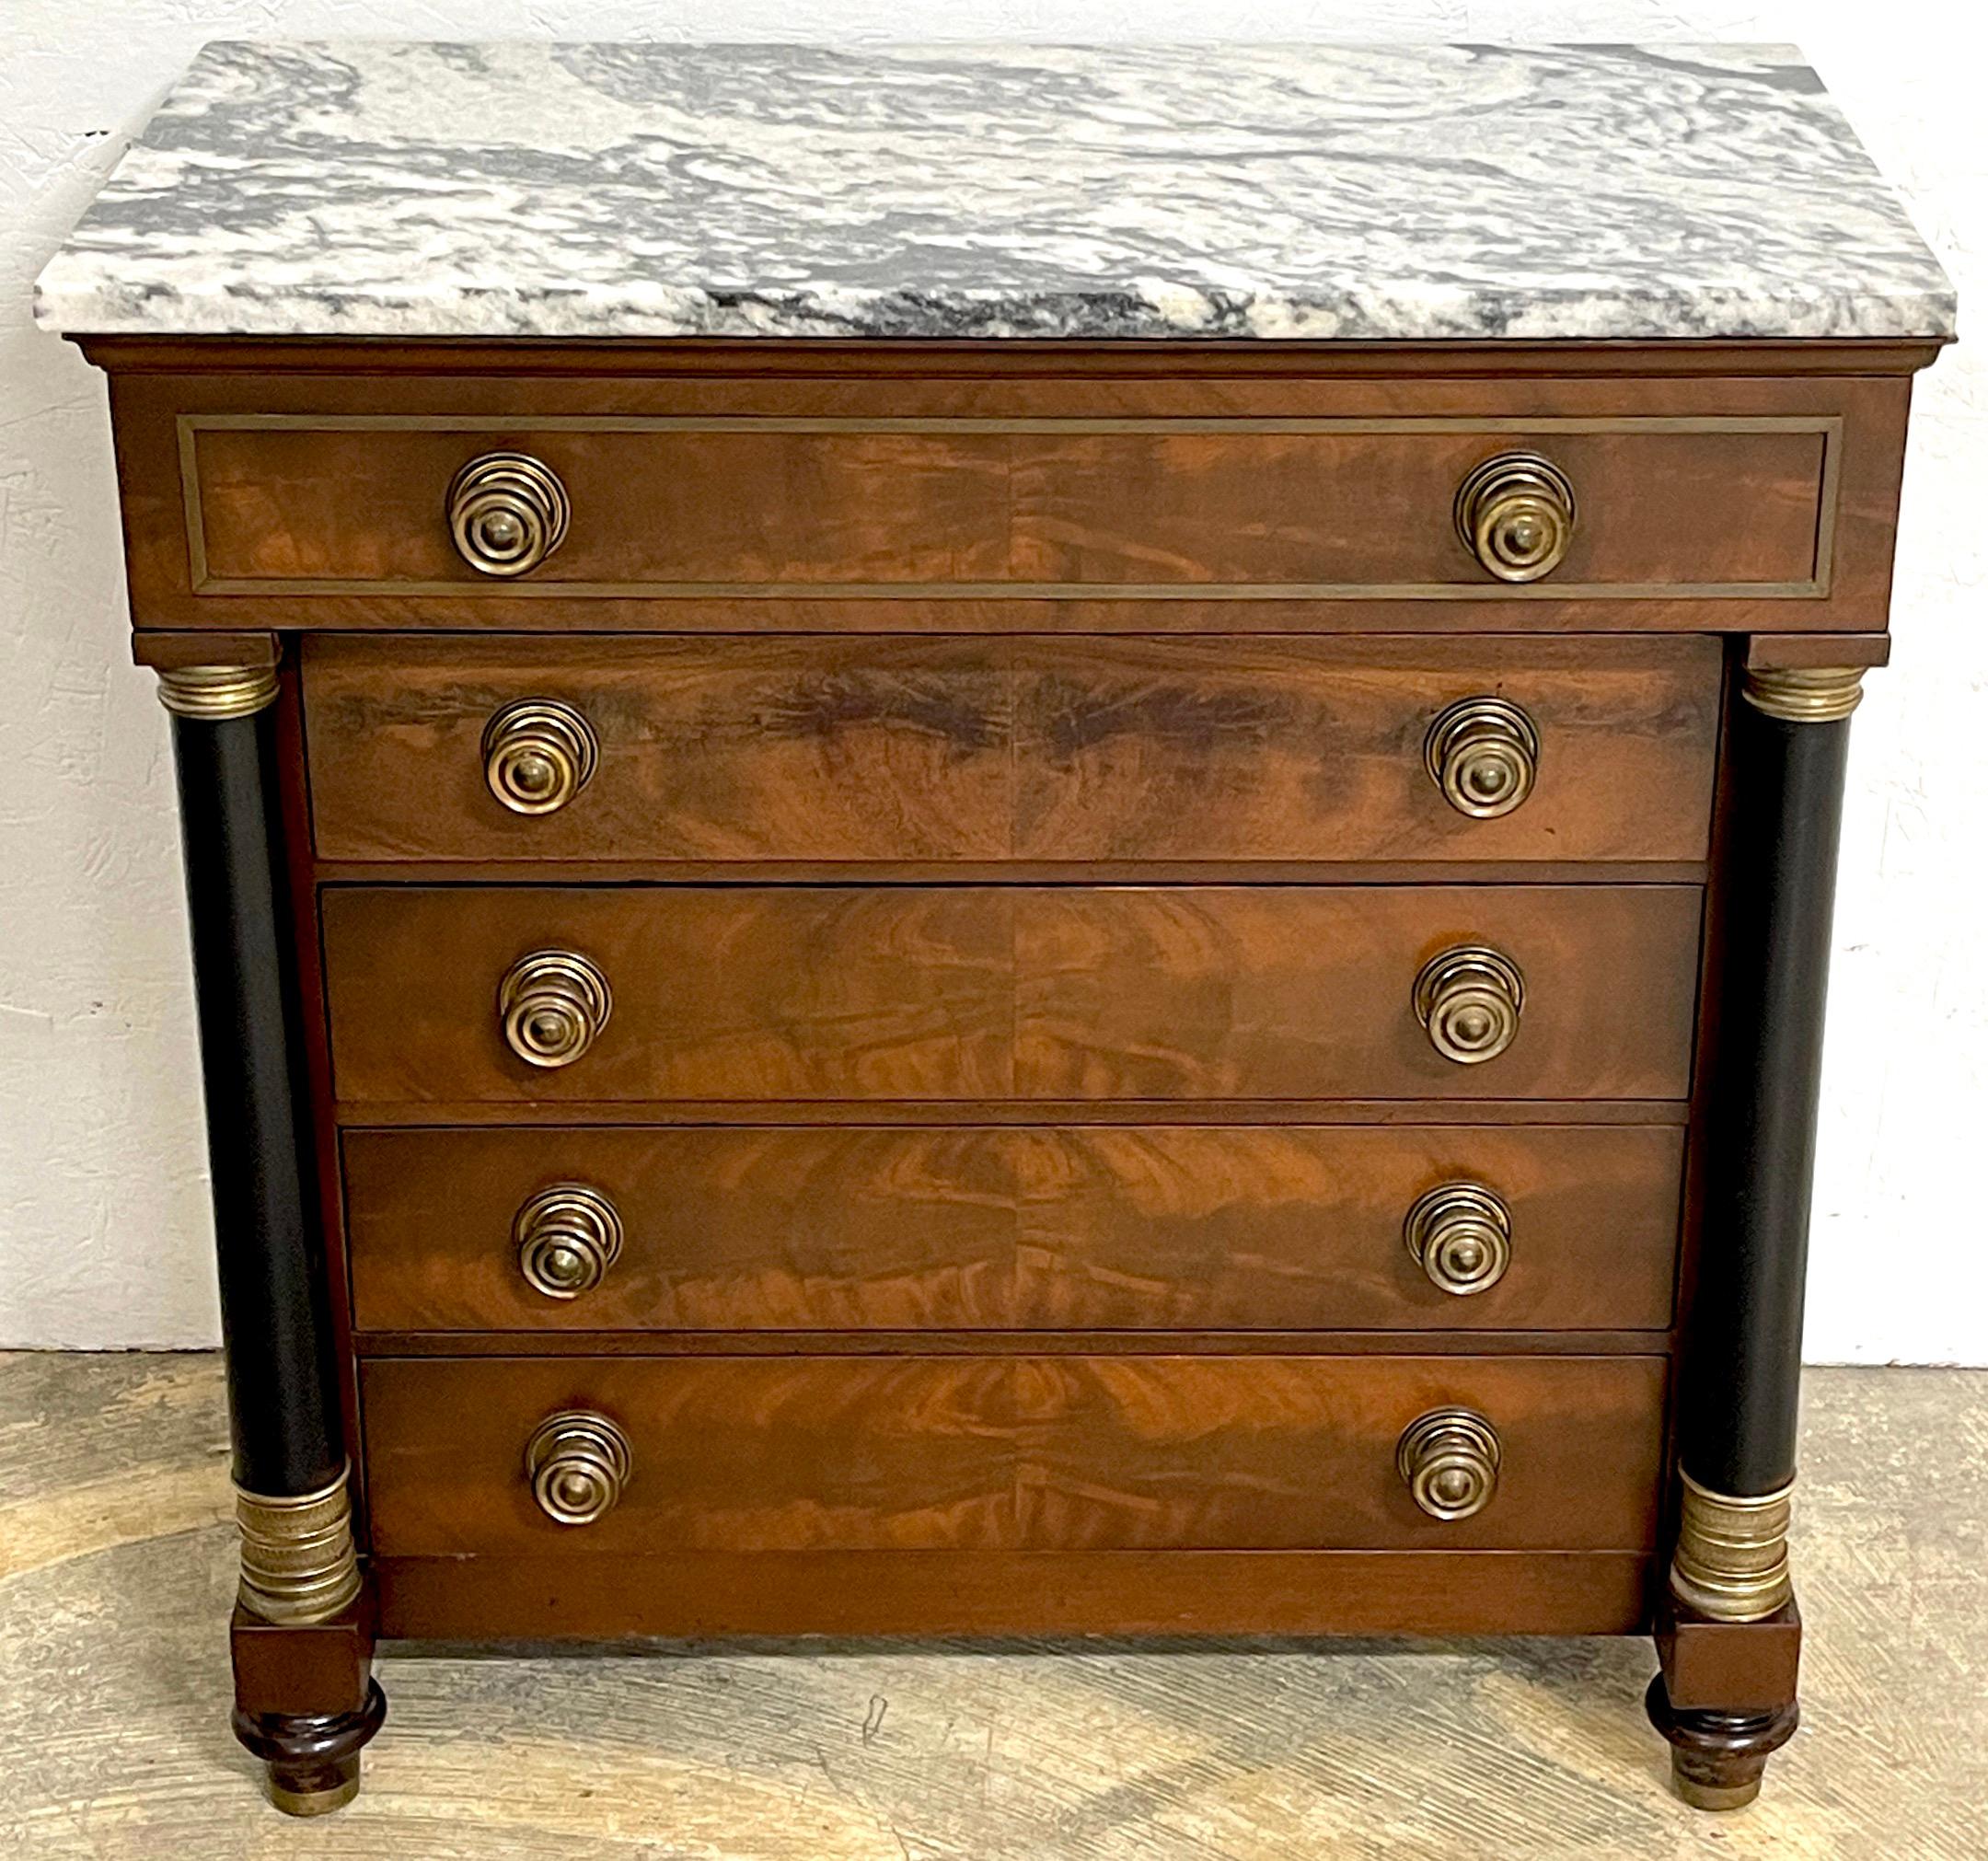 20th Century Pair of Neoclassical Marble Top and Brass Mounted Nightstands/ Chests